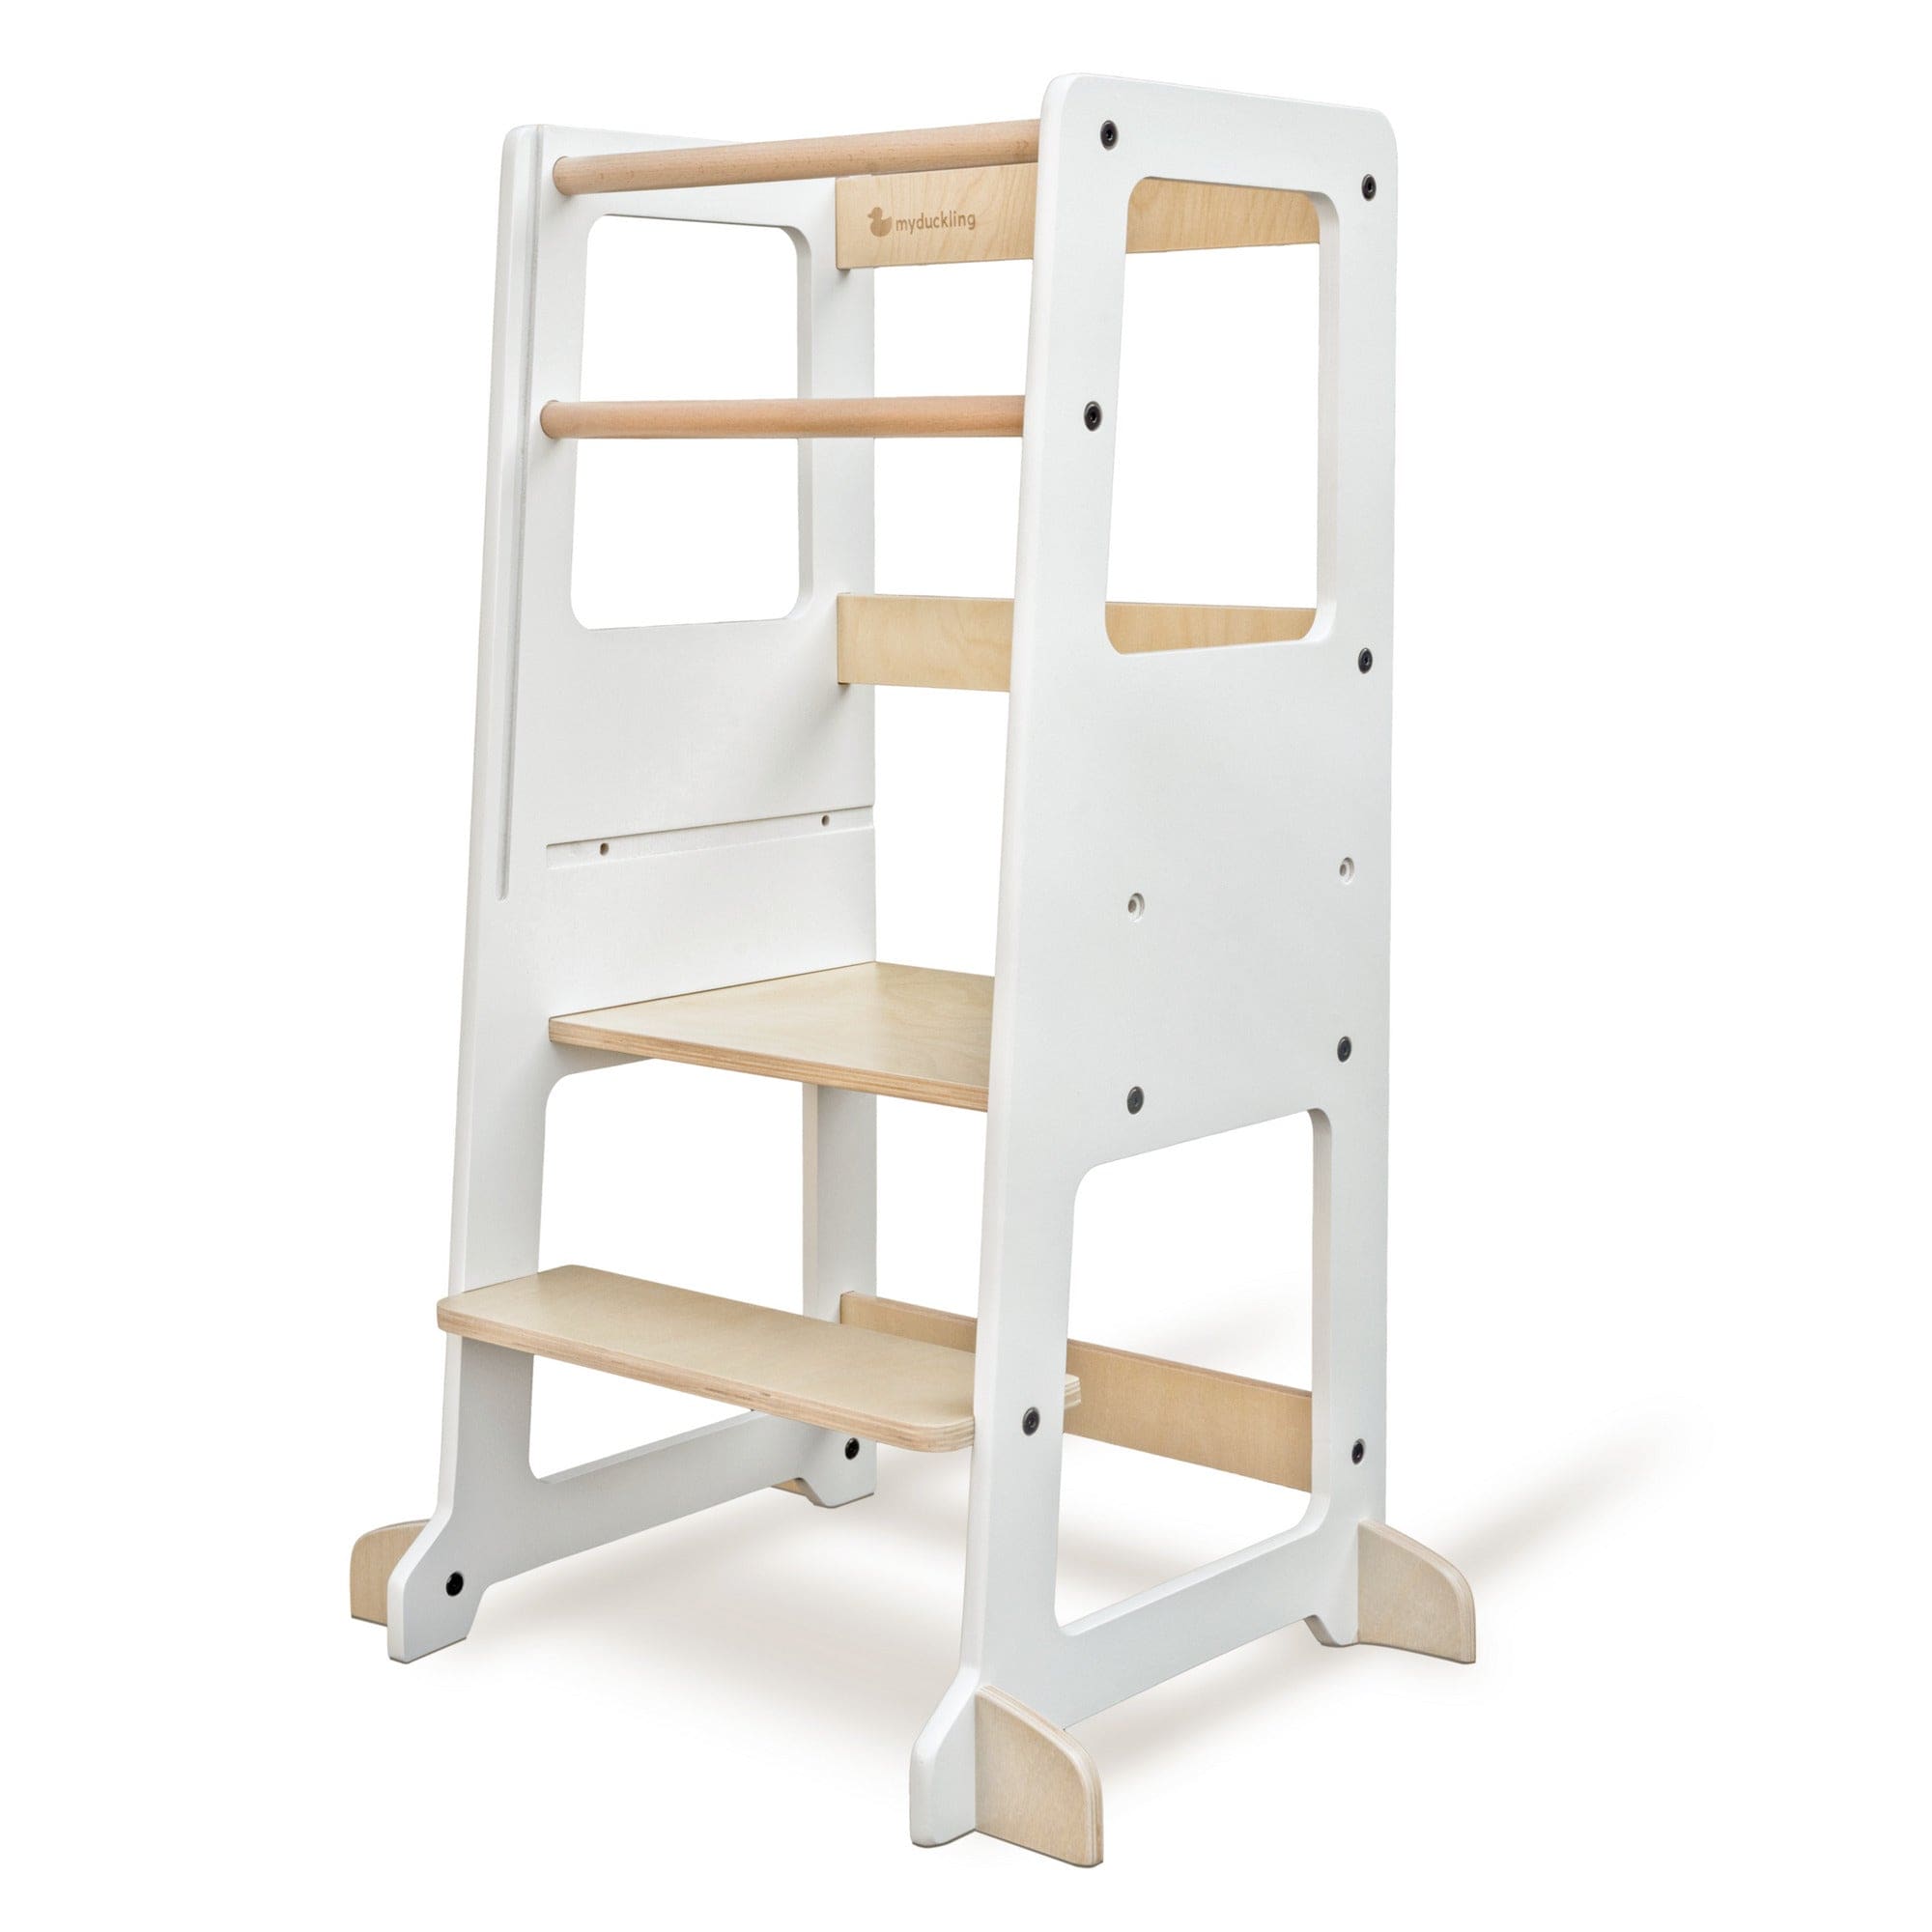 My Duckling LOLA Deluxe Adjustable Learning Tower - Natural/White